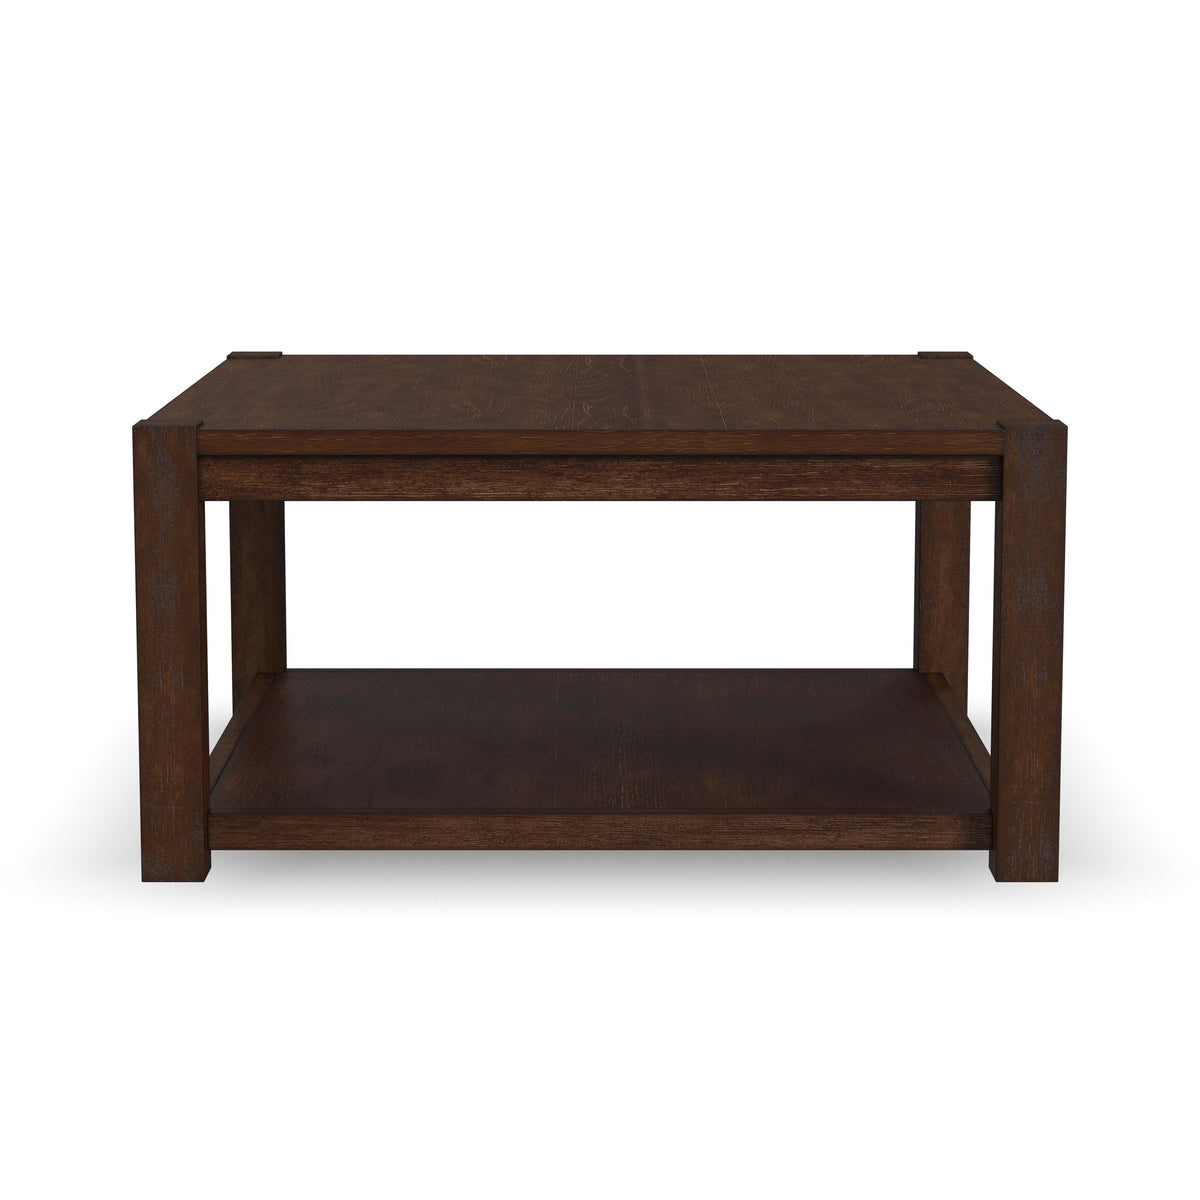 Boulder Square Coffee Table with Casters